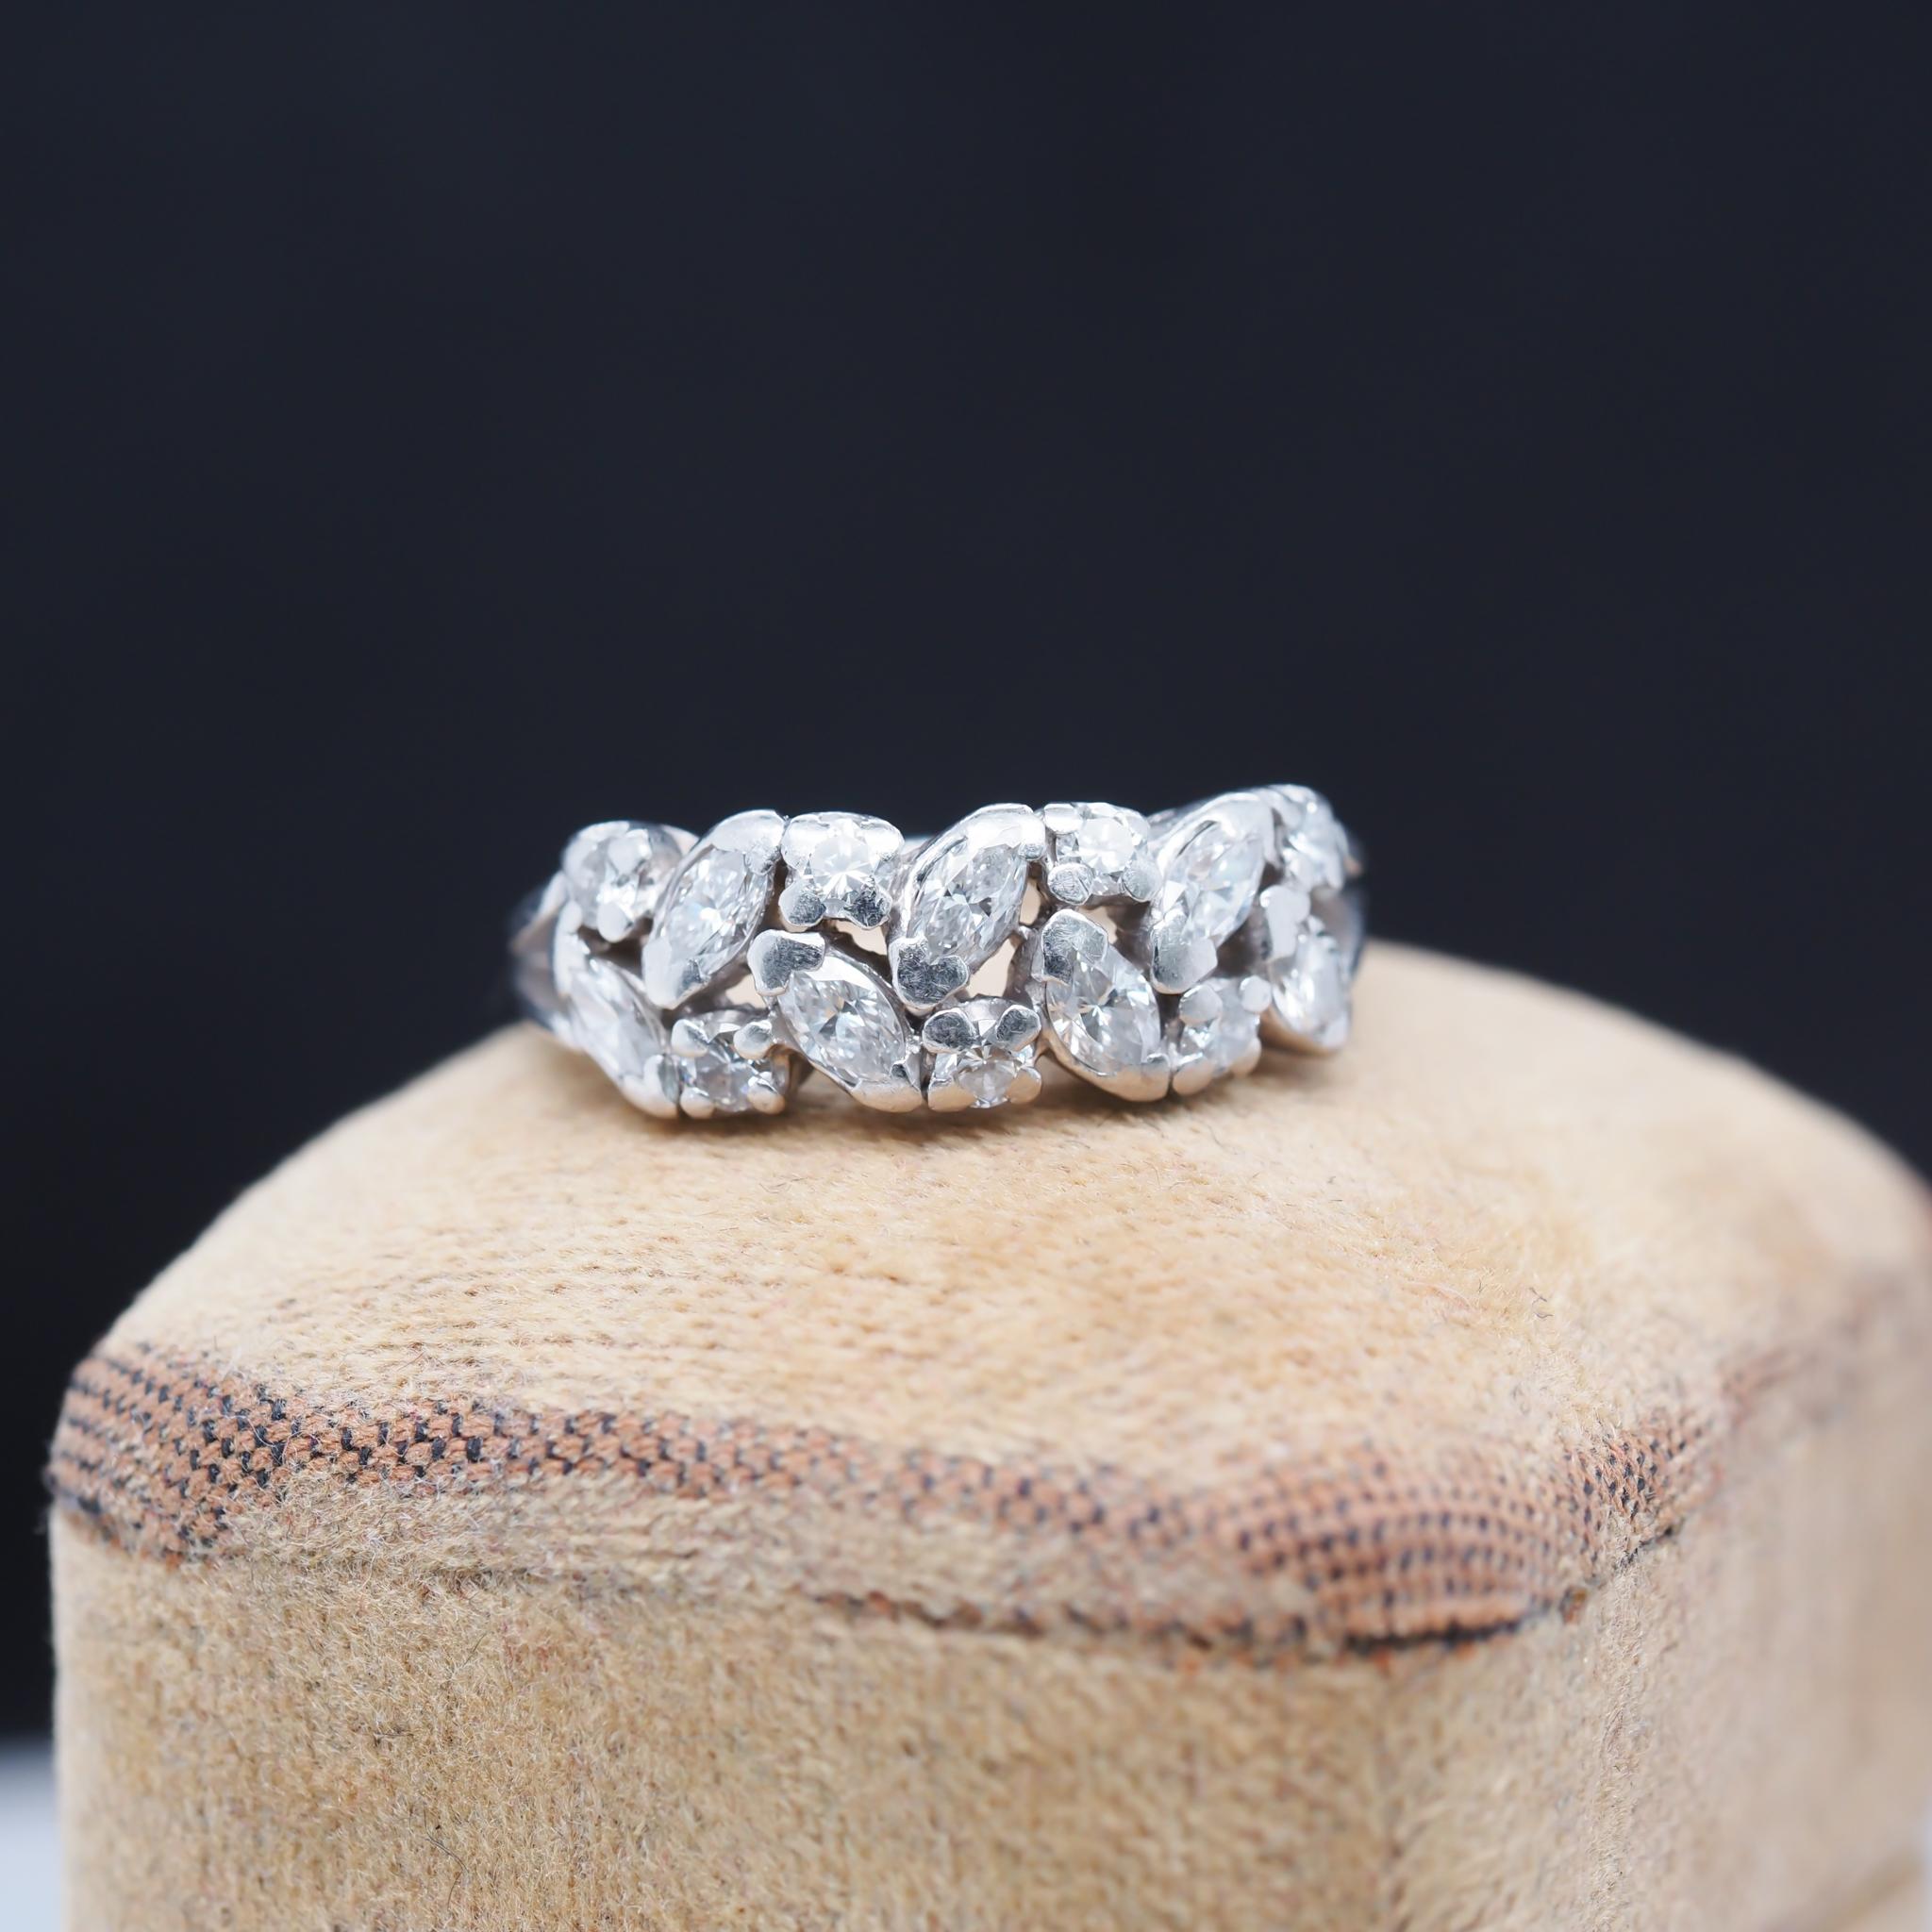 Item Details:
Ring Size:5.5
Metal Type: Platinum [Hallmarked, and Tested]
Weight: 5.7 grams
‌
Diamond Details:
Weight: .75ct, total weight
Cut: Marquise & Round Brilliant
Clarity: F-G
Color: VS
‌
Band Width: 1.9 mm
Condition: Excellent